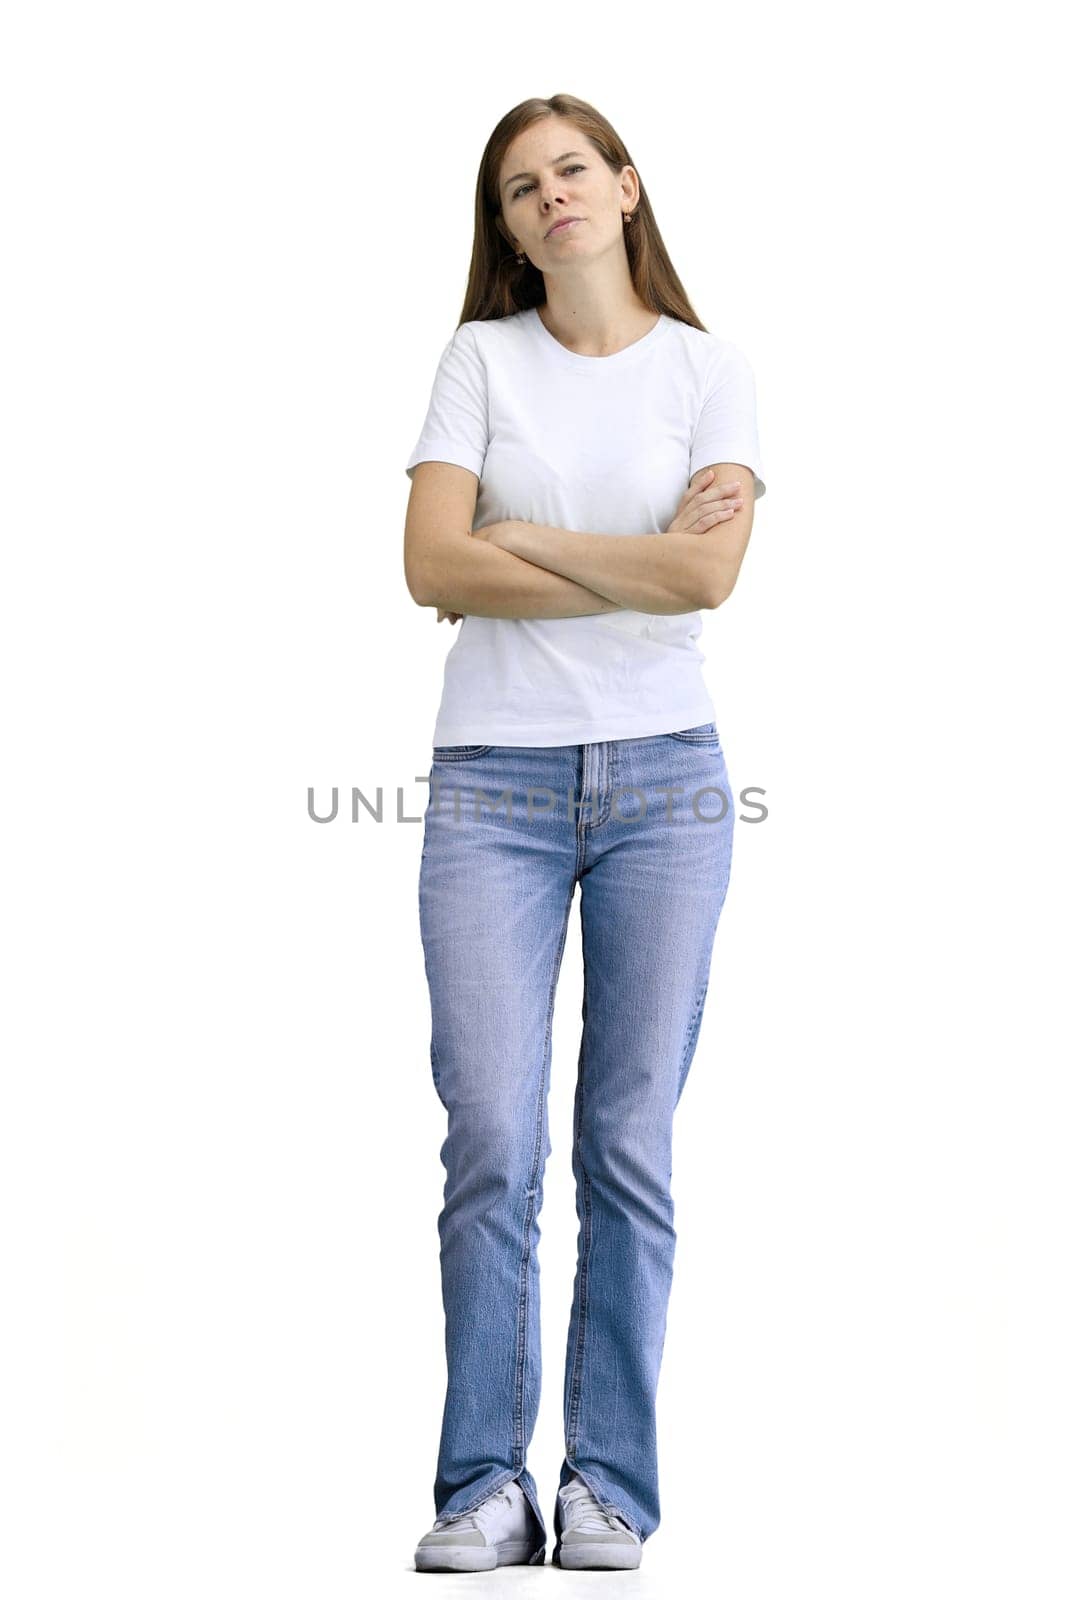 A woman, full-length, on a white background, crossed her arms.